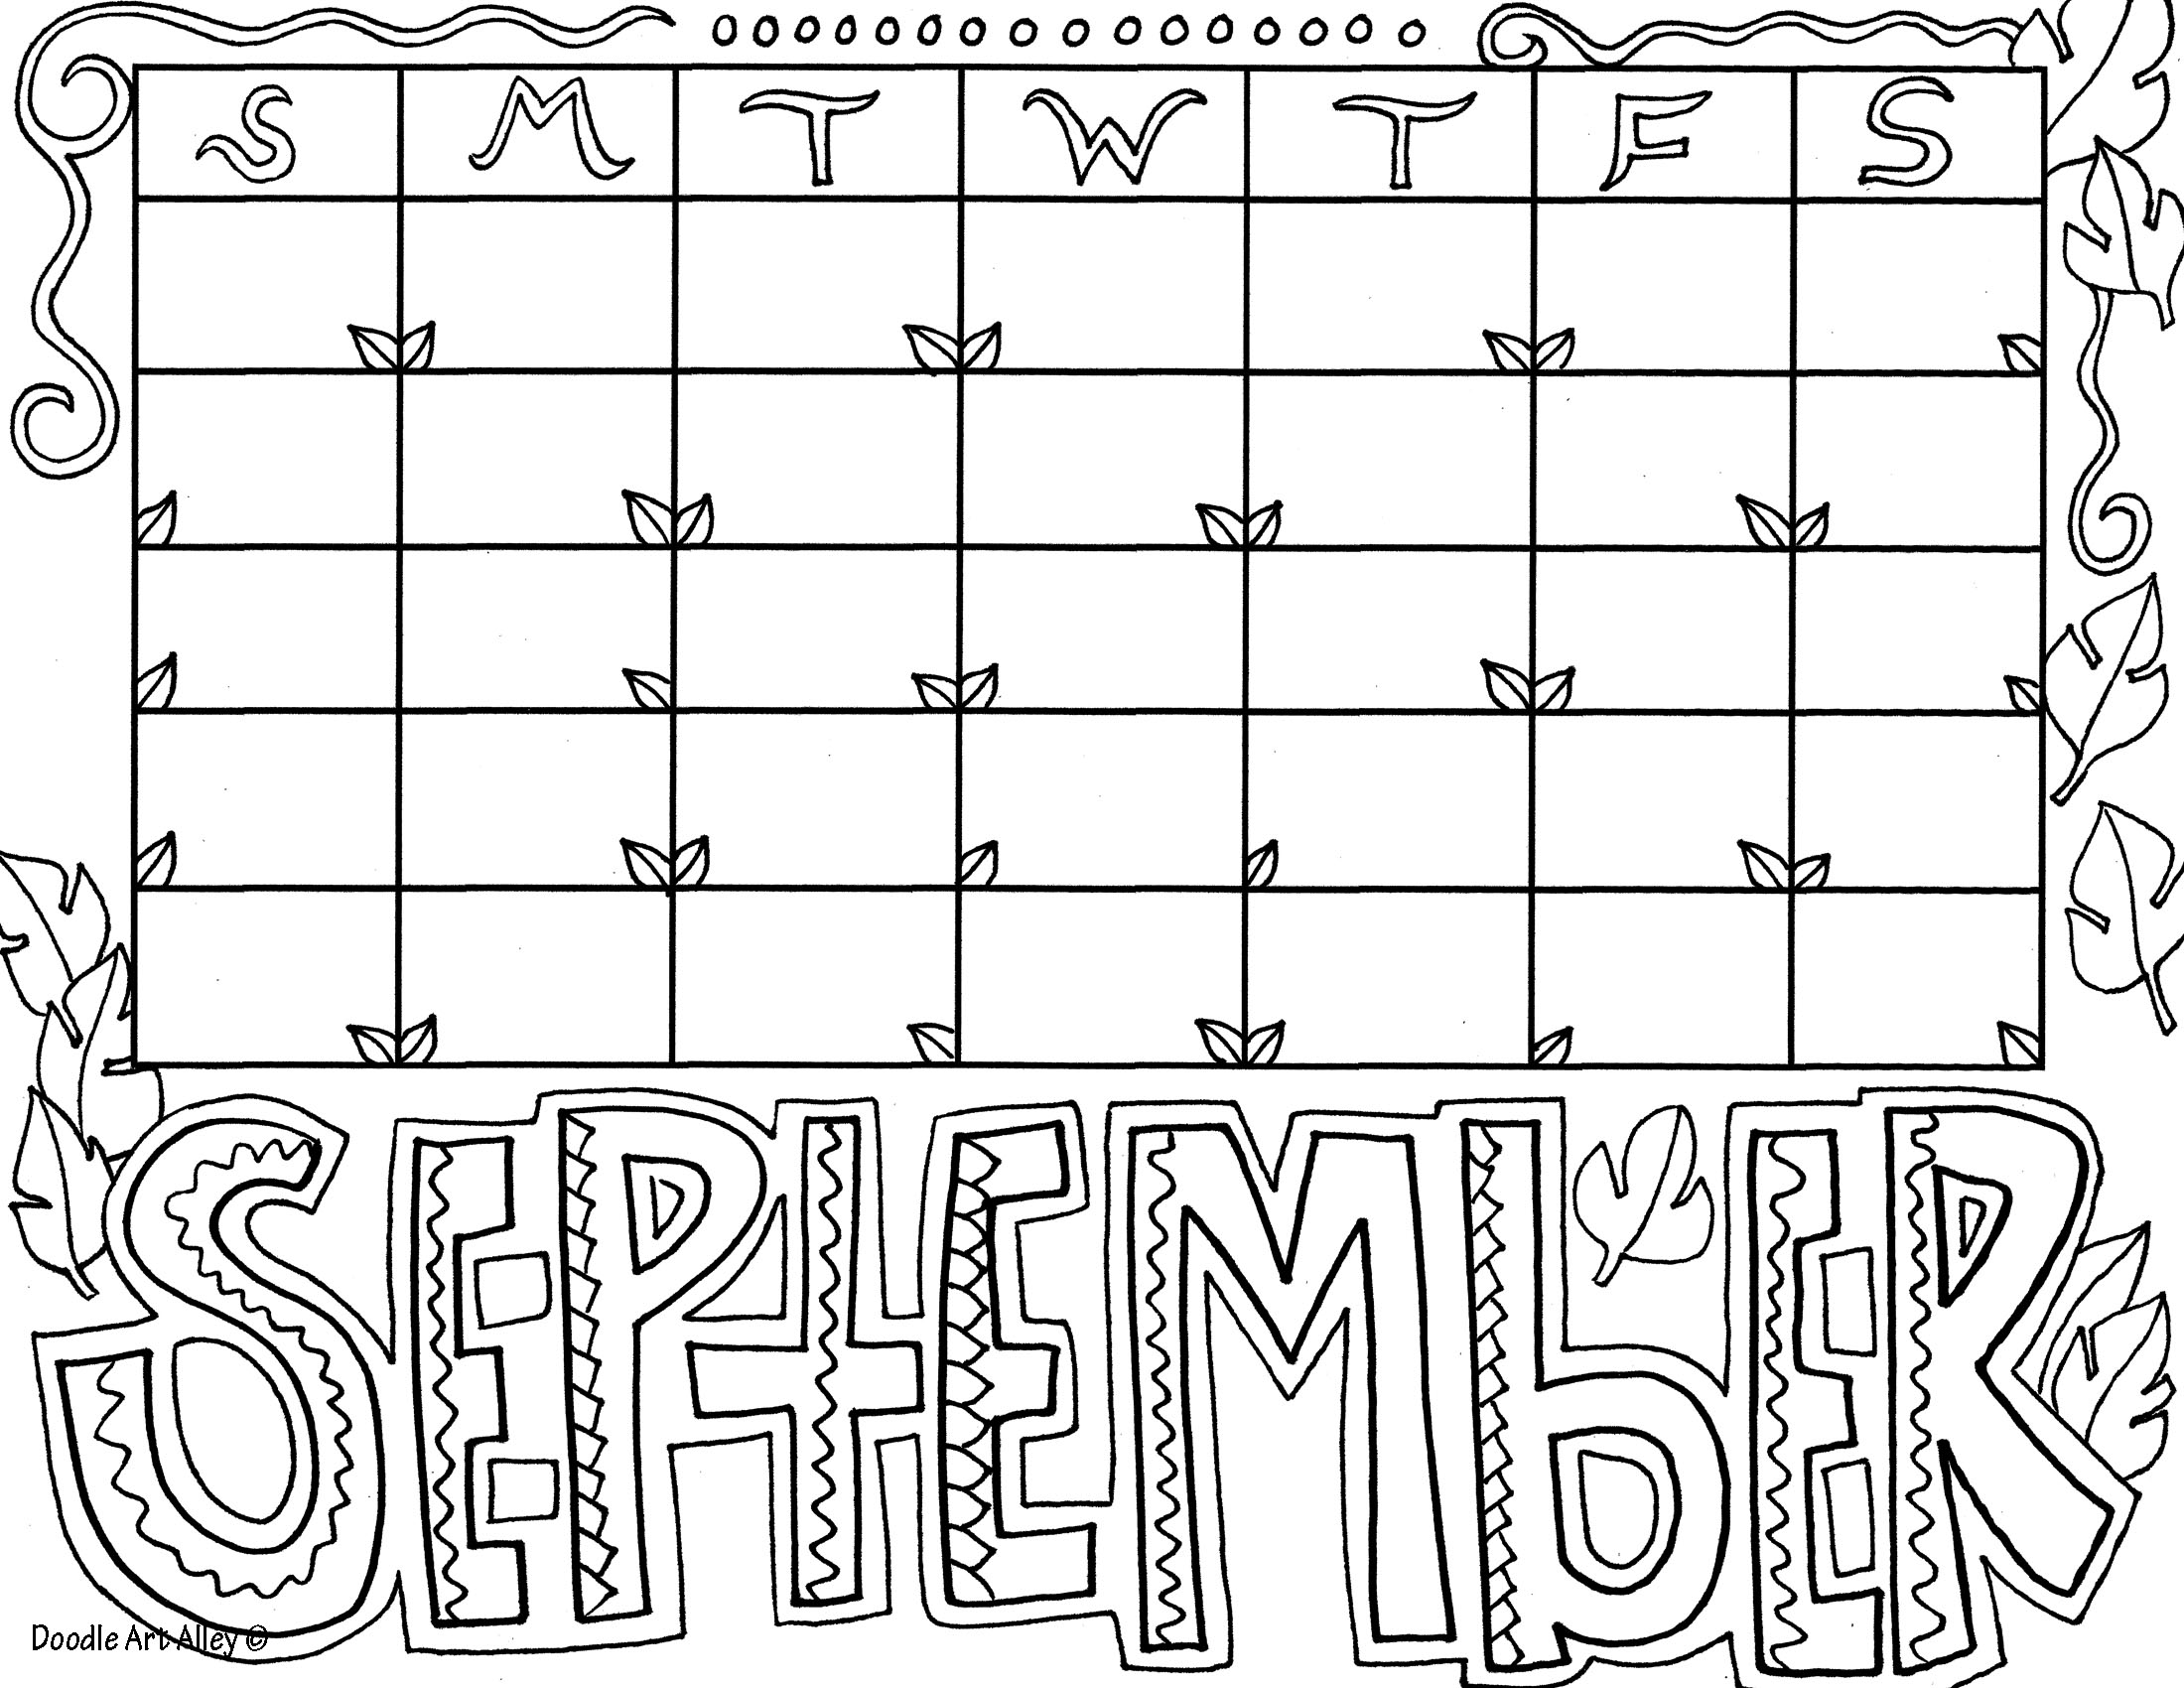 september-coloring-pages-doodle-art-alley